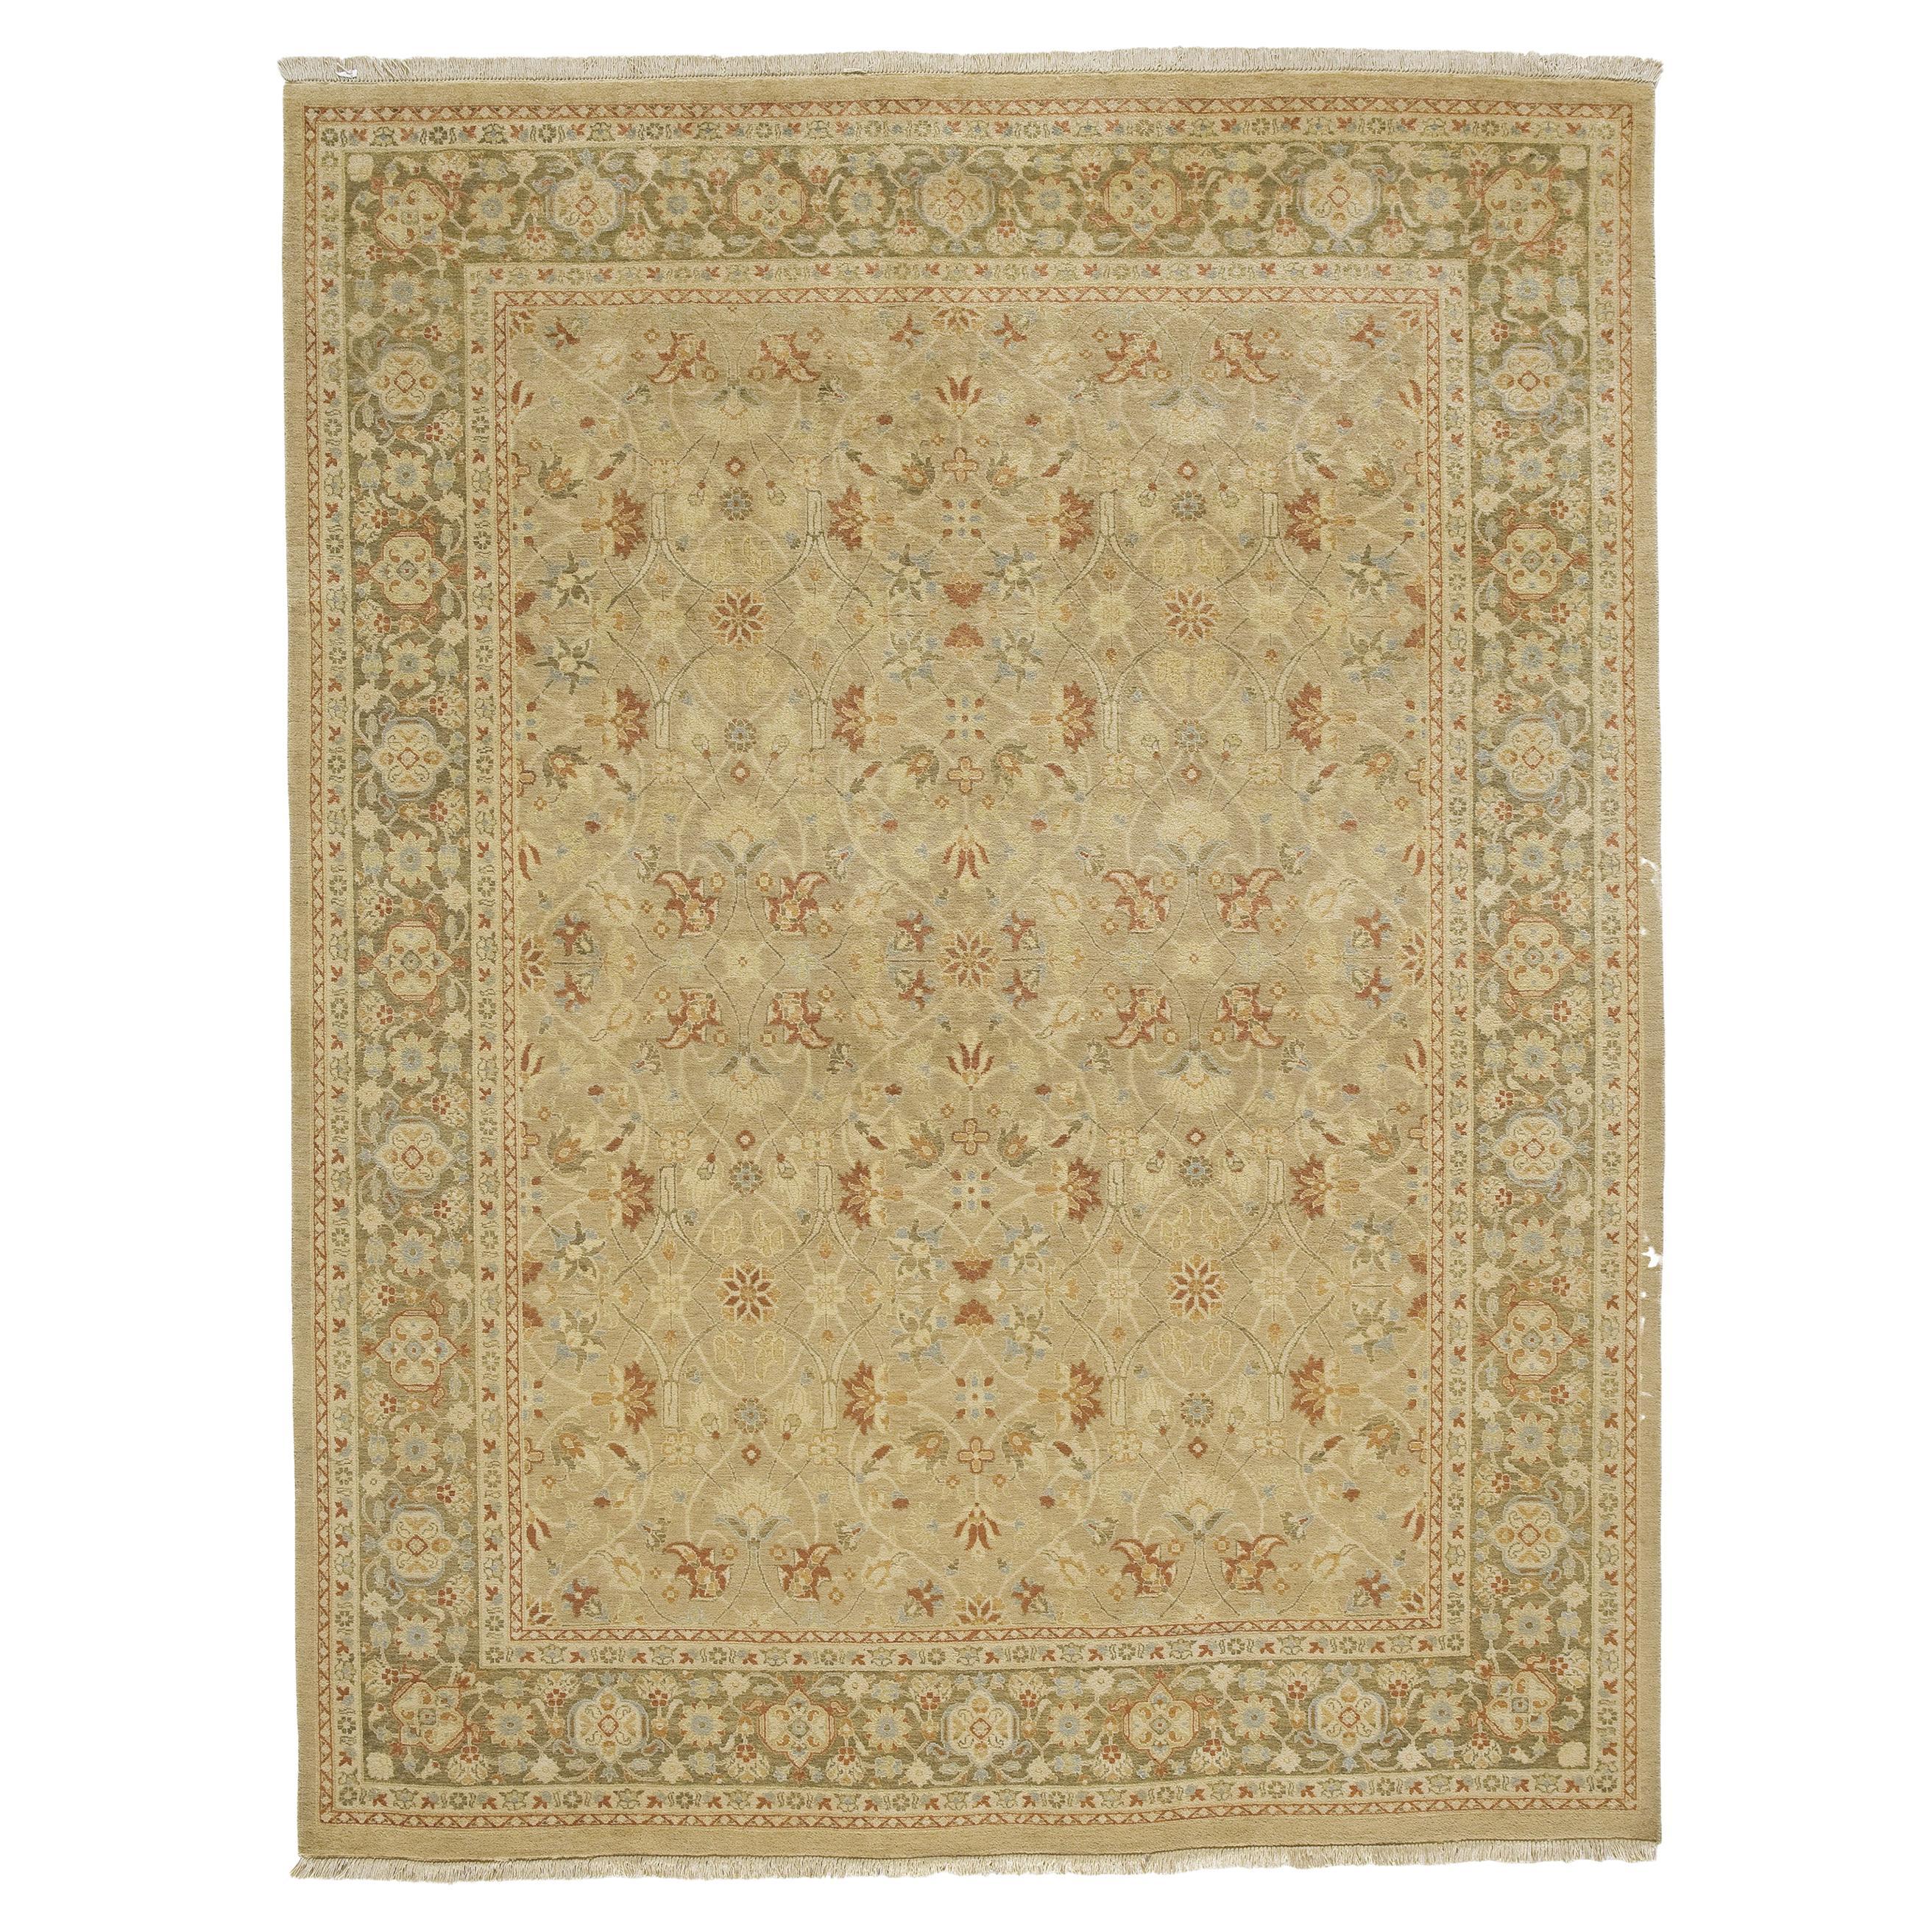 Luxury Traditional Hand-Knotted Tabriz Gold/Olive 10X14 Rug